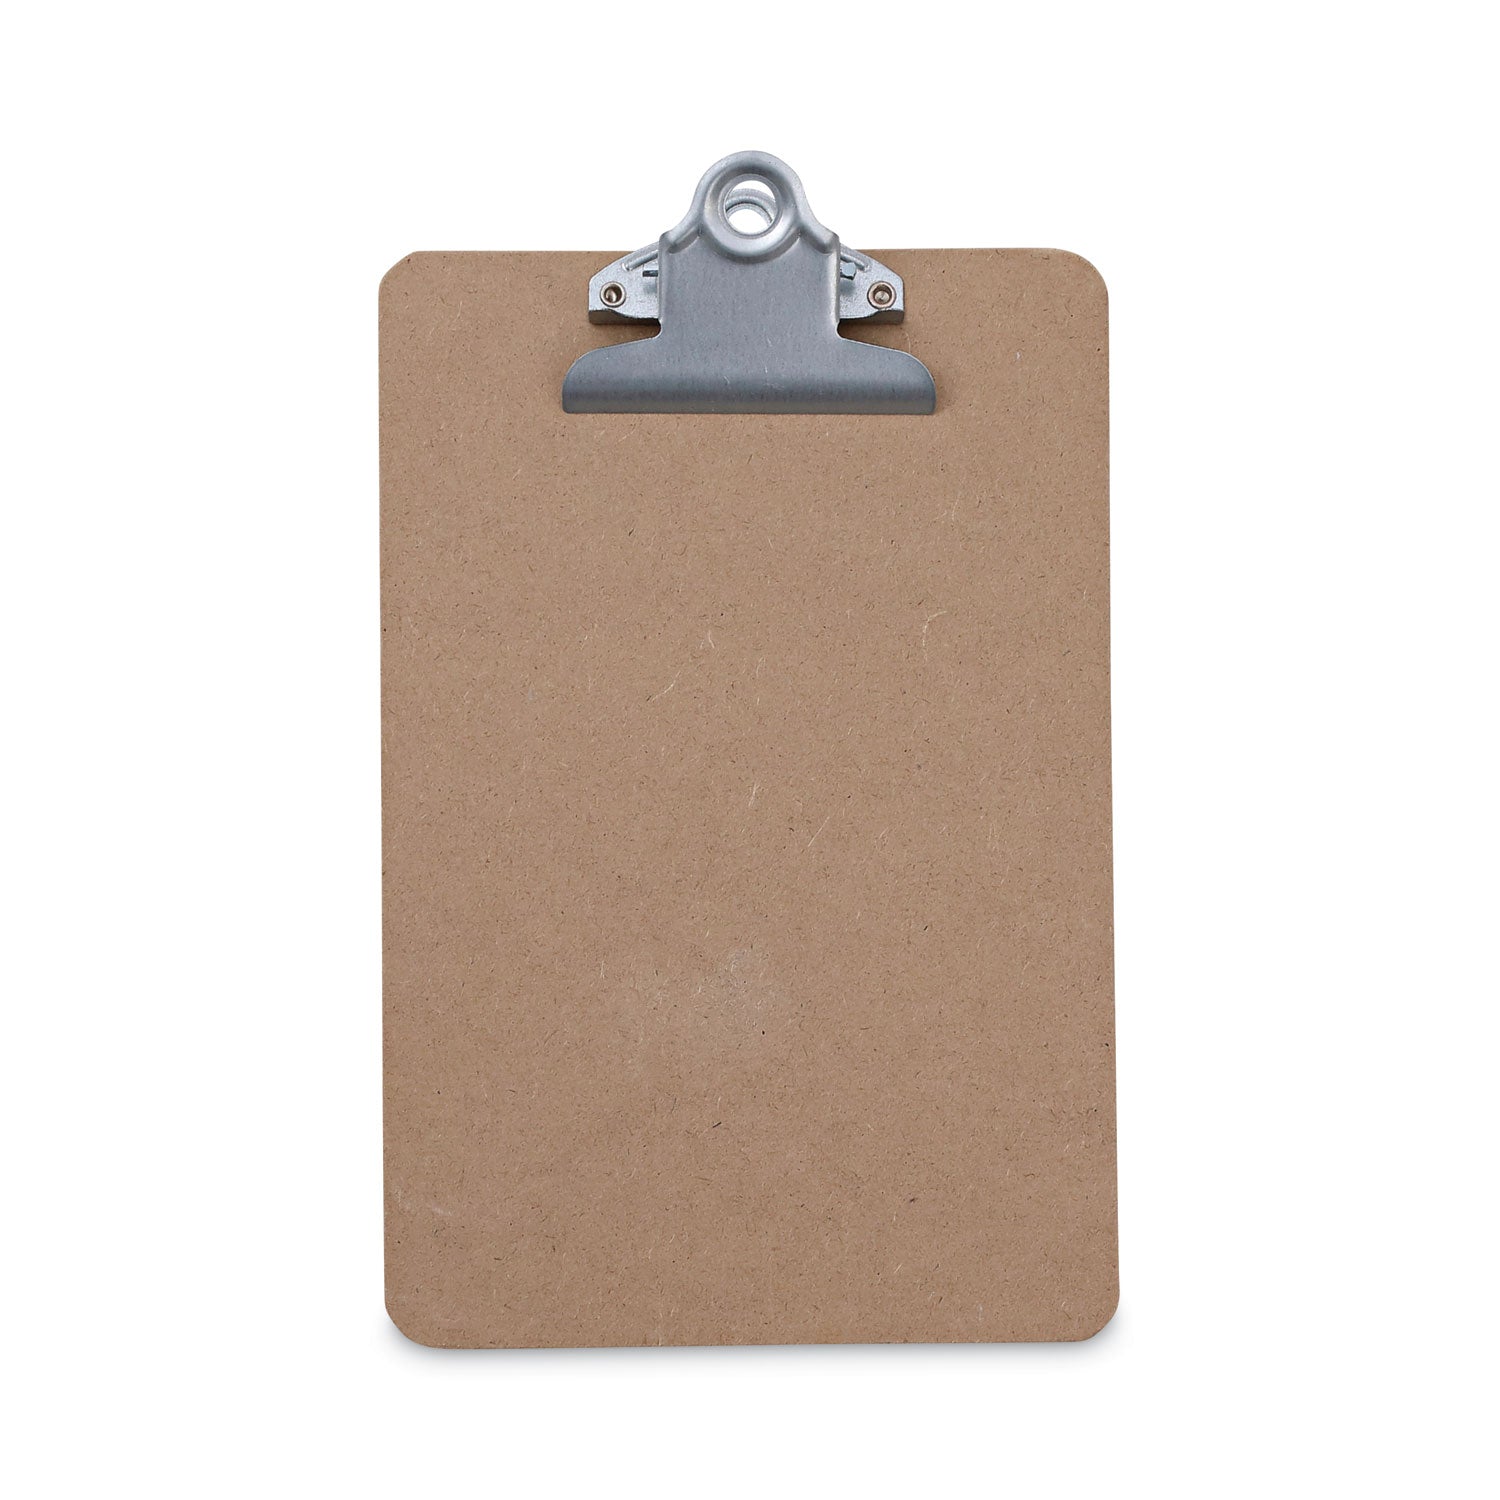 hardboard-clipboard-075-clip-capacity-holds-5-x-8-sheets-brown-3-pack_unv05610vp - 1